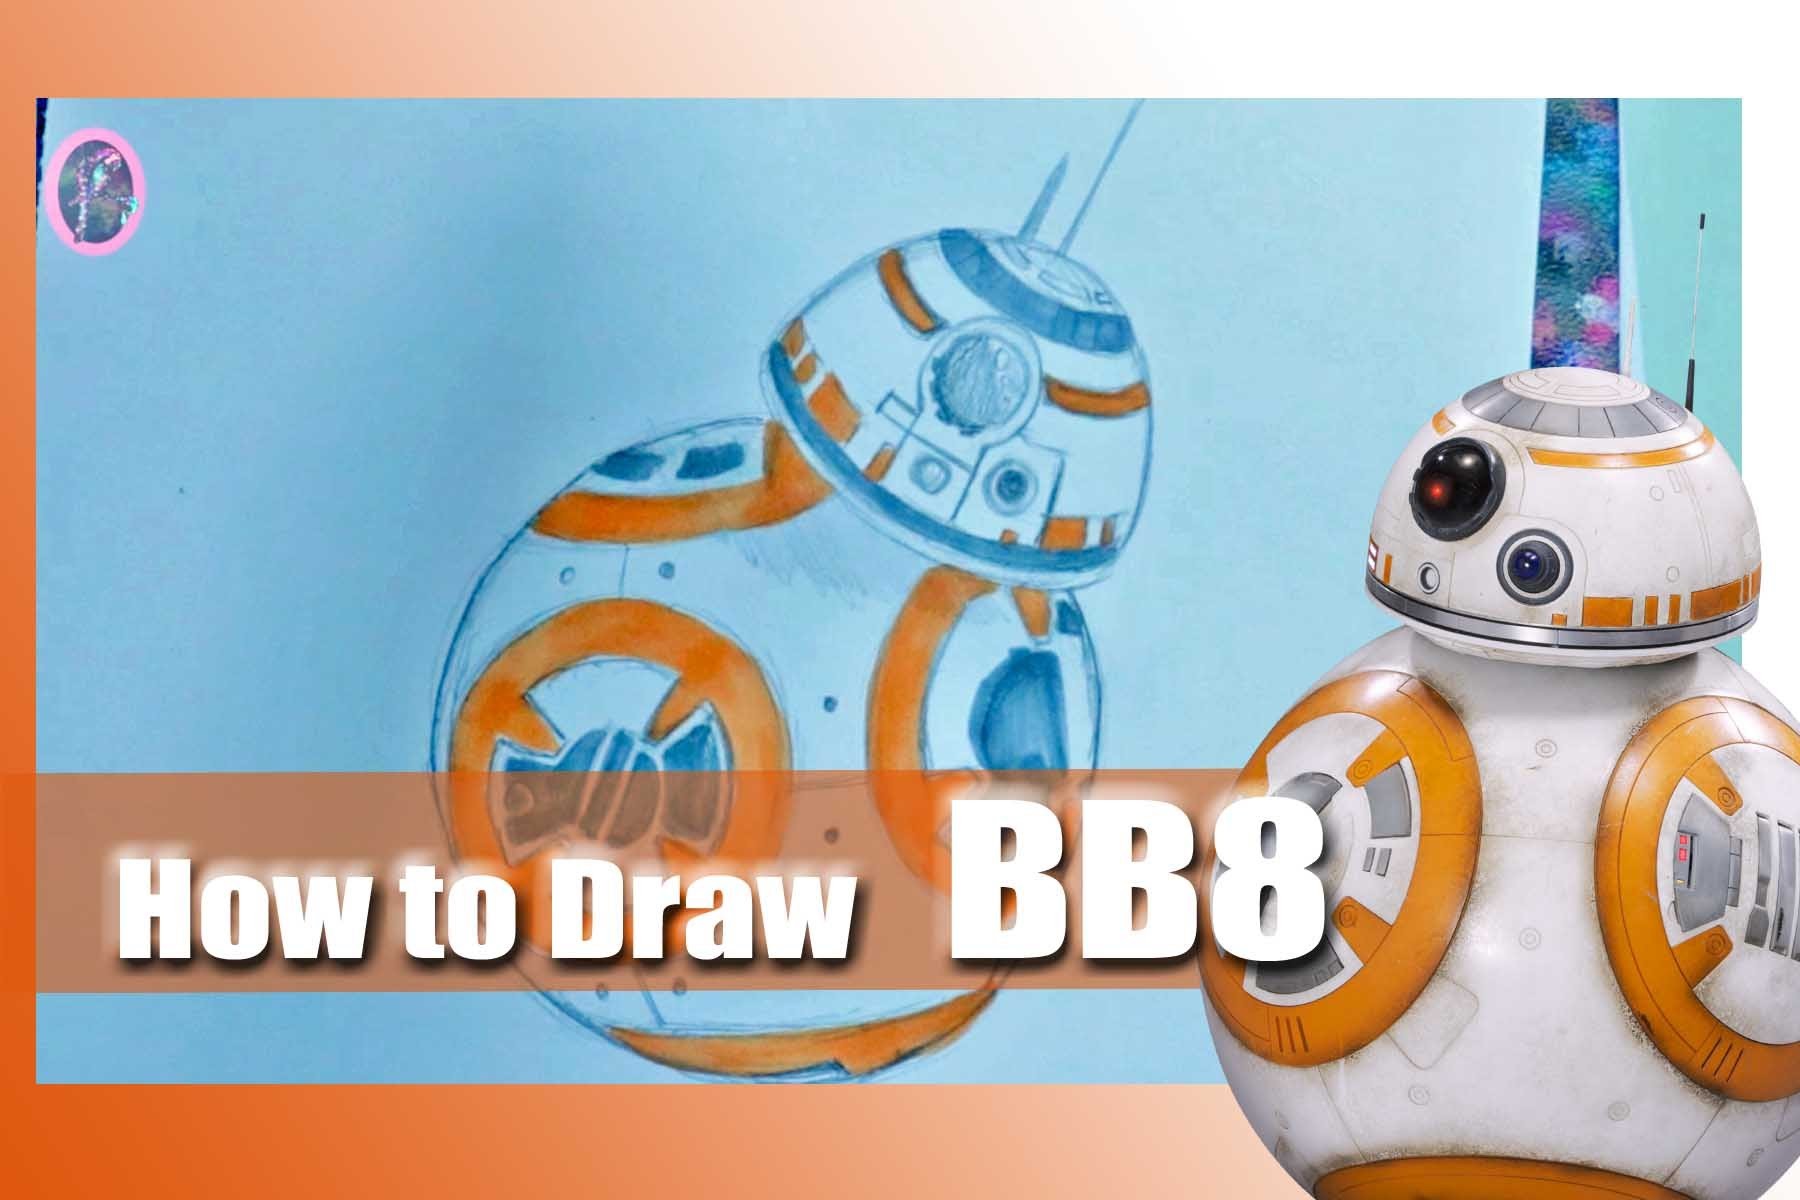 How to Draw BB8 from STAR WARS The Force Awakens - @dramaticparrot